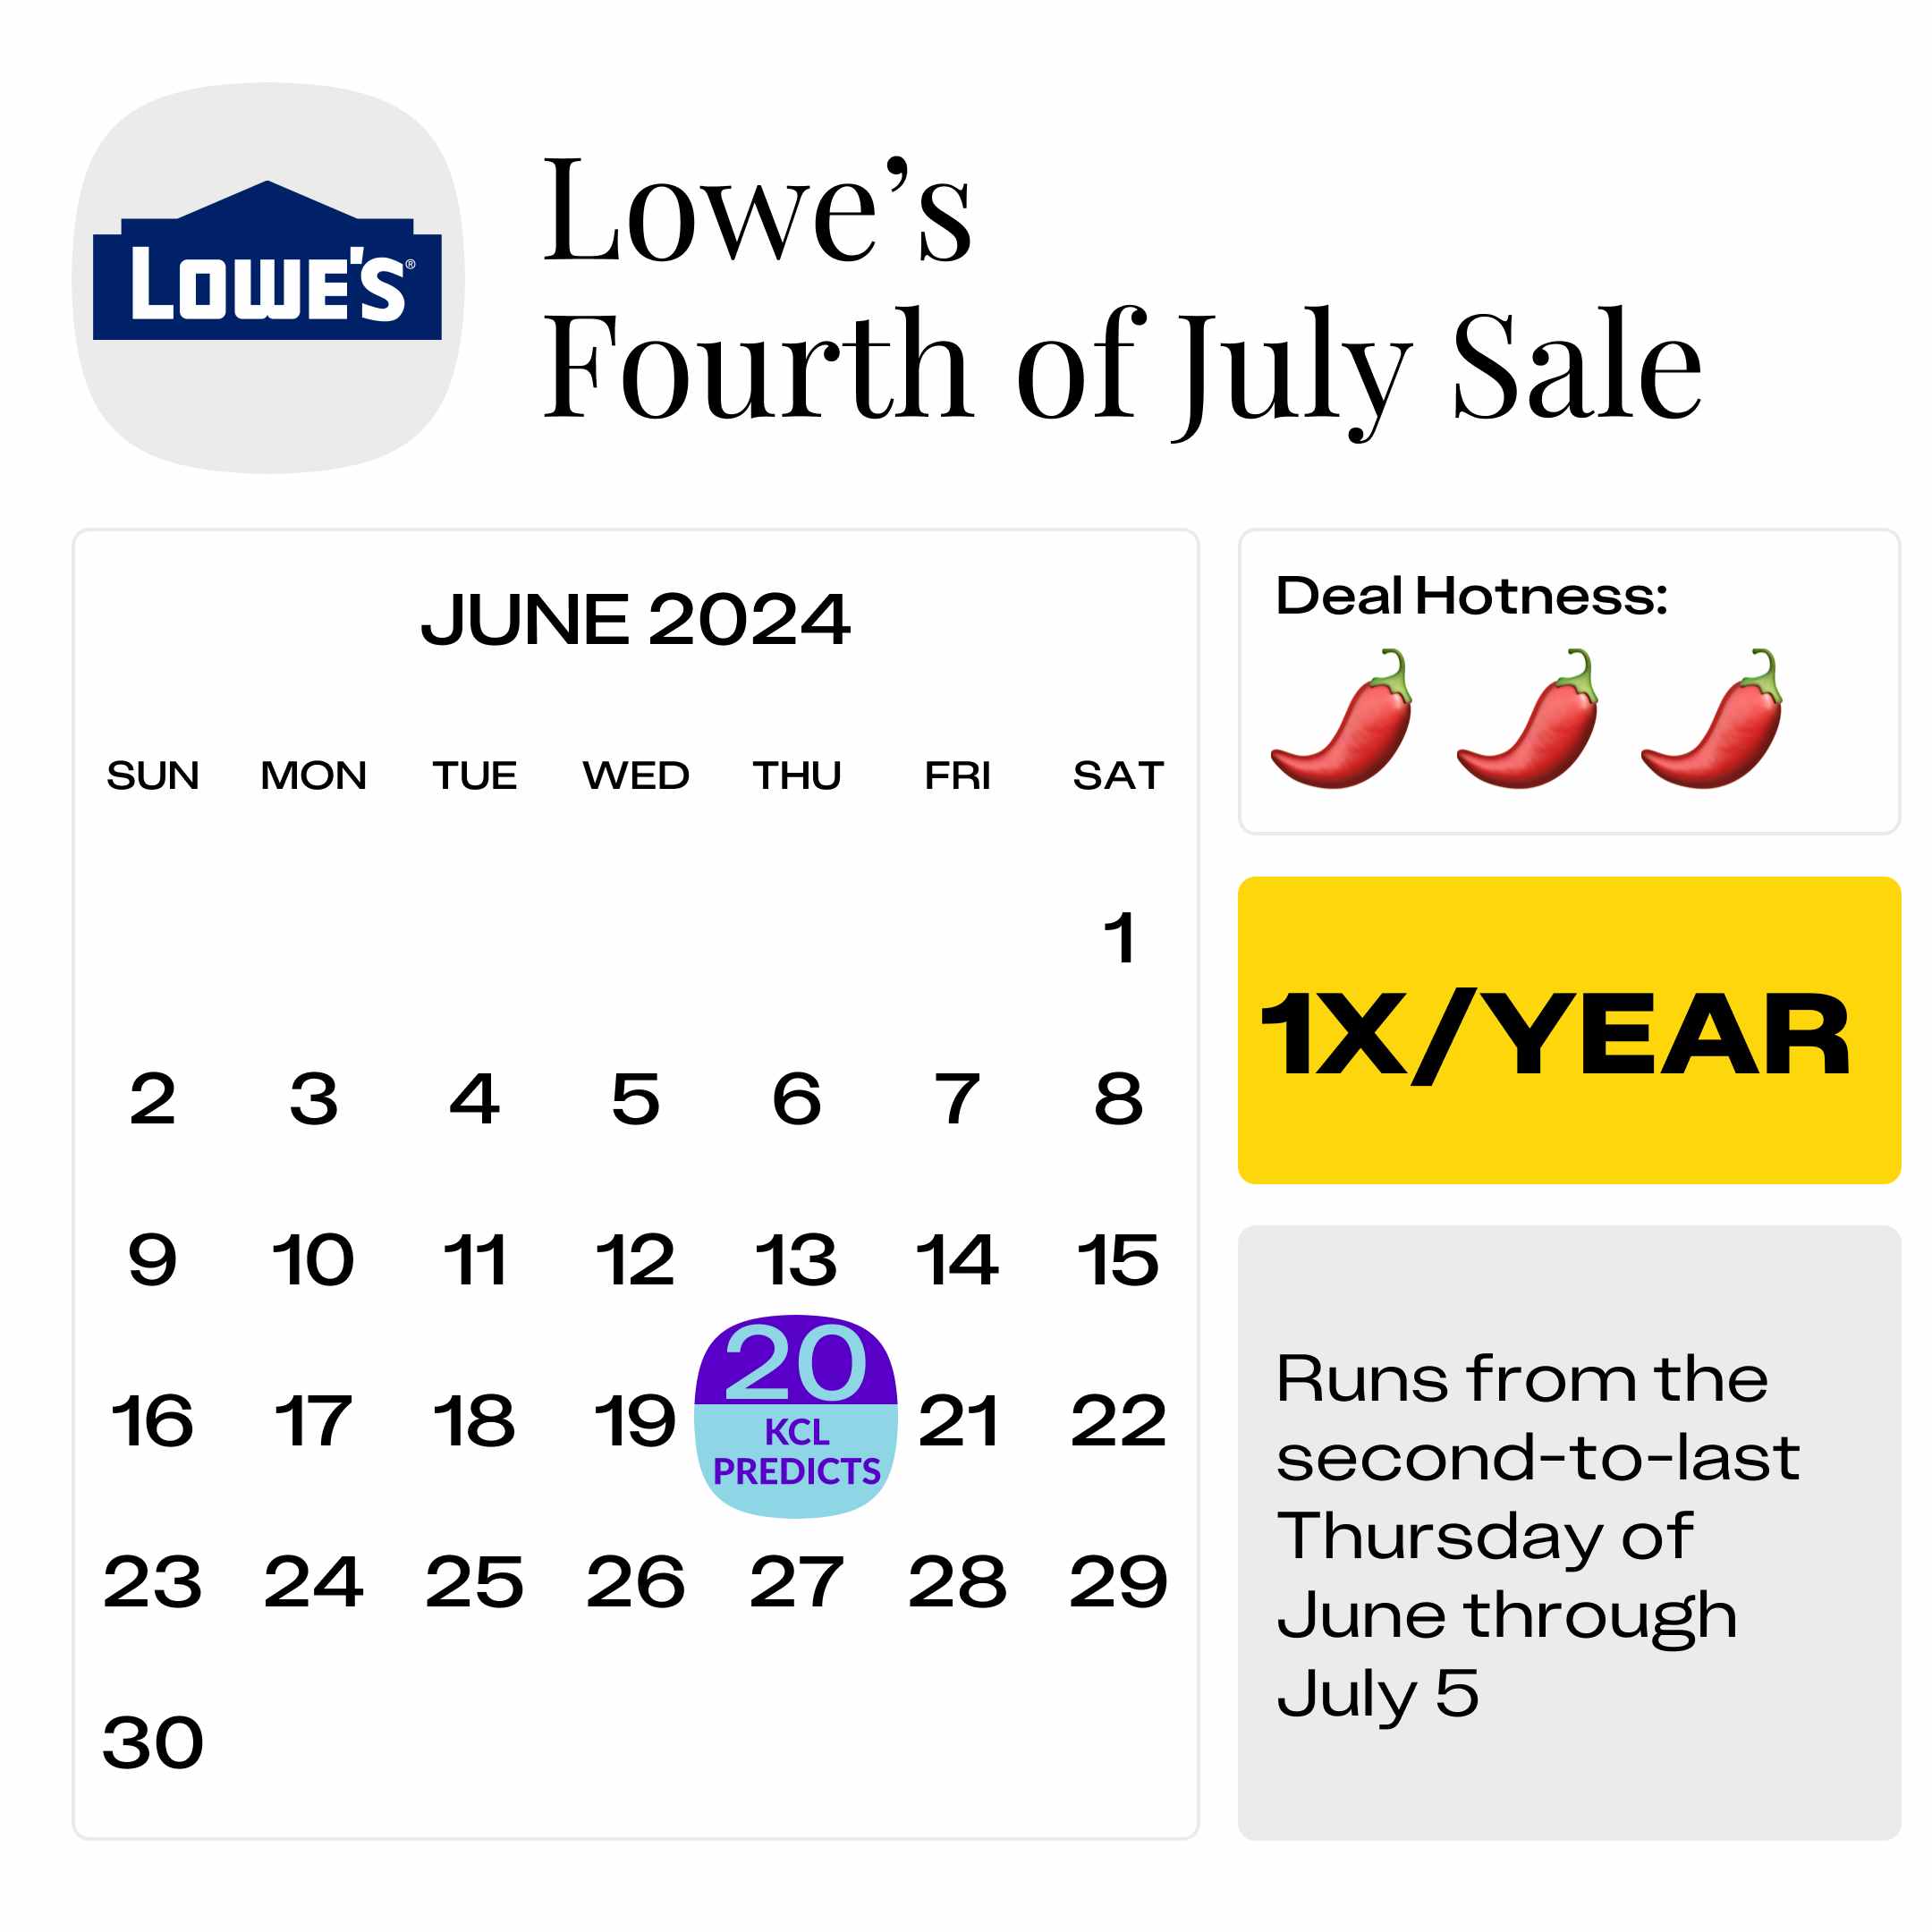 Lowes-Fourth-of-July-Sale